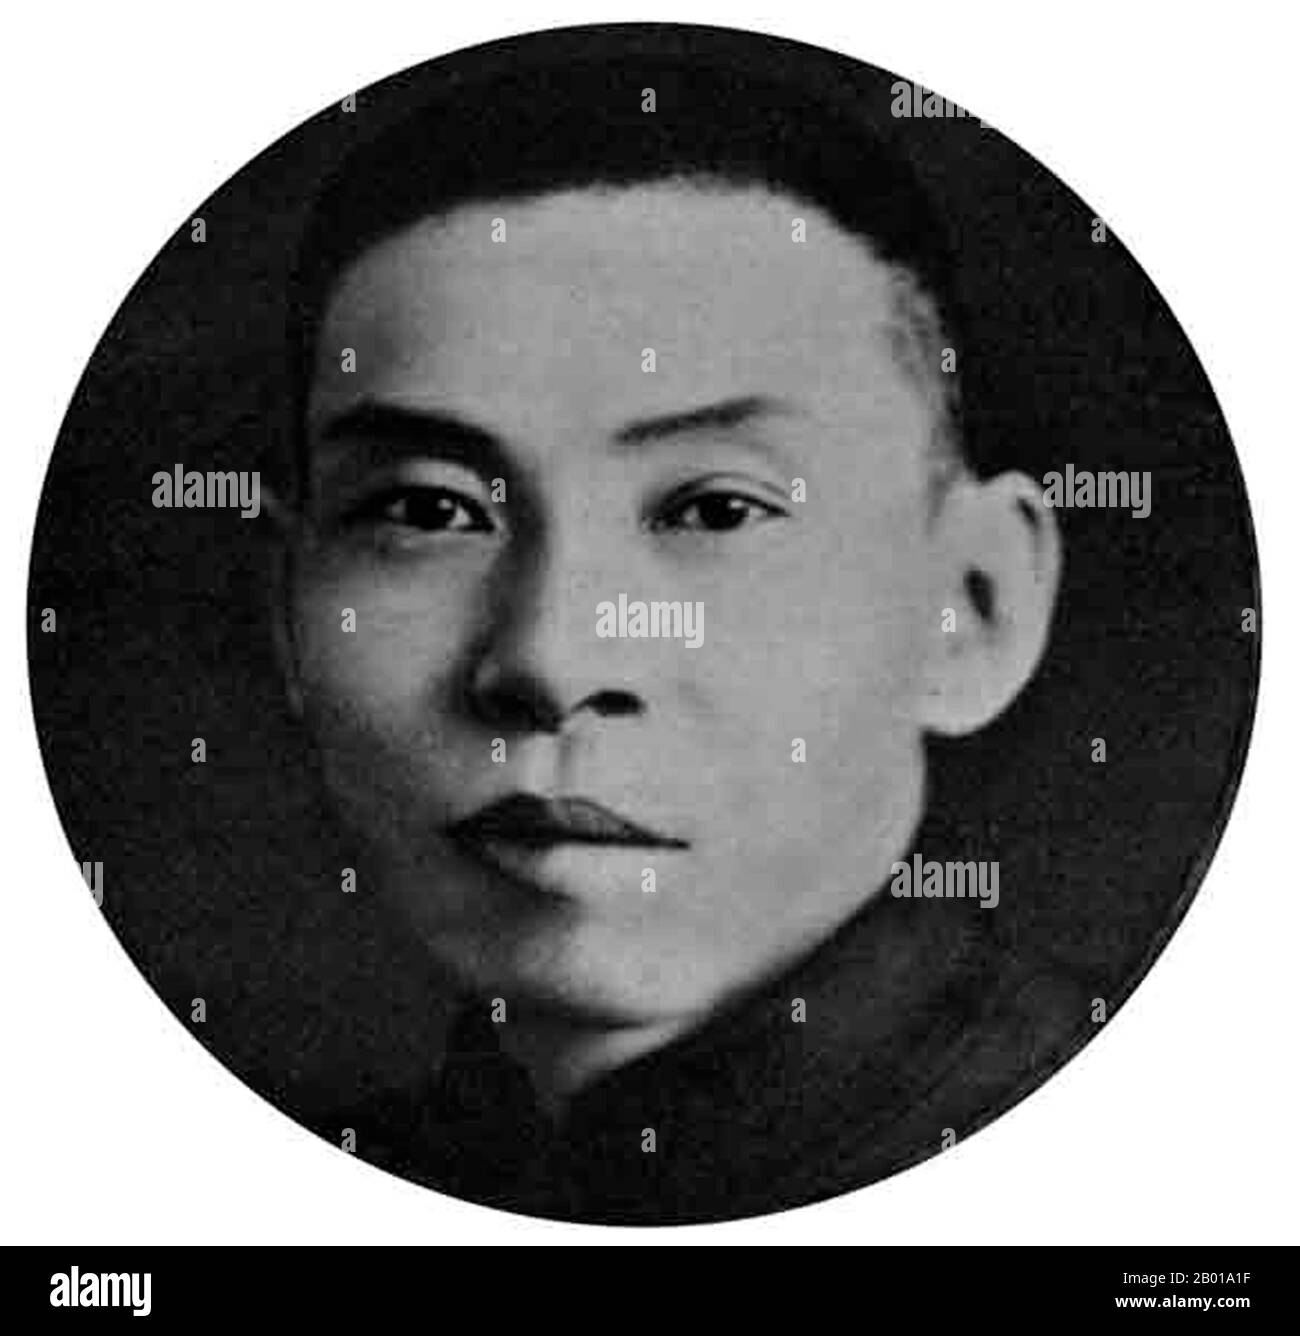 China: Du Yuesheng (22 August 1888 - 16 August 1951), Green Gang mobster and Shanghai godfather, c. 1940s.  Du Yuesheng (Tu Yüeh-sheng), commonly known as 'Big-Ears Du', was a Chinese gangster who spent much of his life in Shanghai. He was a key supporter of the Kuomintang (KMT; aka Nationalists) and Chiang Kai-shek in their battle against the Communists during the 1920s, and was a figure of some importance during the Second Sino-Japanese War.  After the Chinese Civil War and the KMT's retreat to Taiwan, Du went into exile in Hong Kong and remained there until his death in 1951. Stock Photo